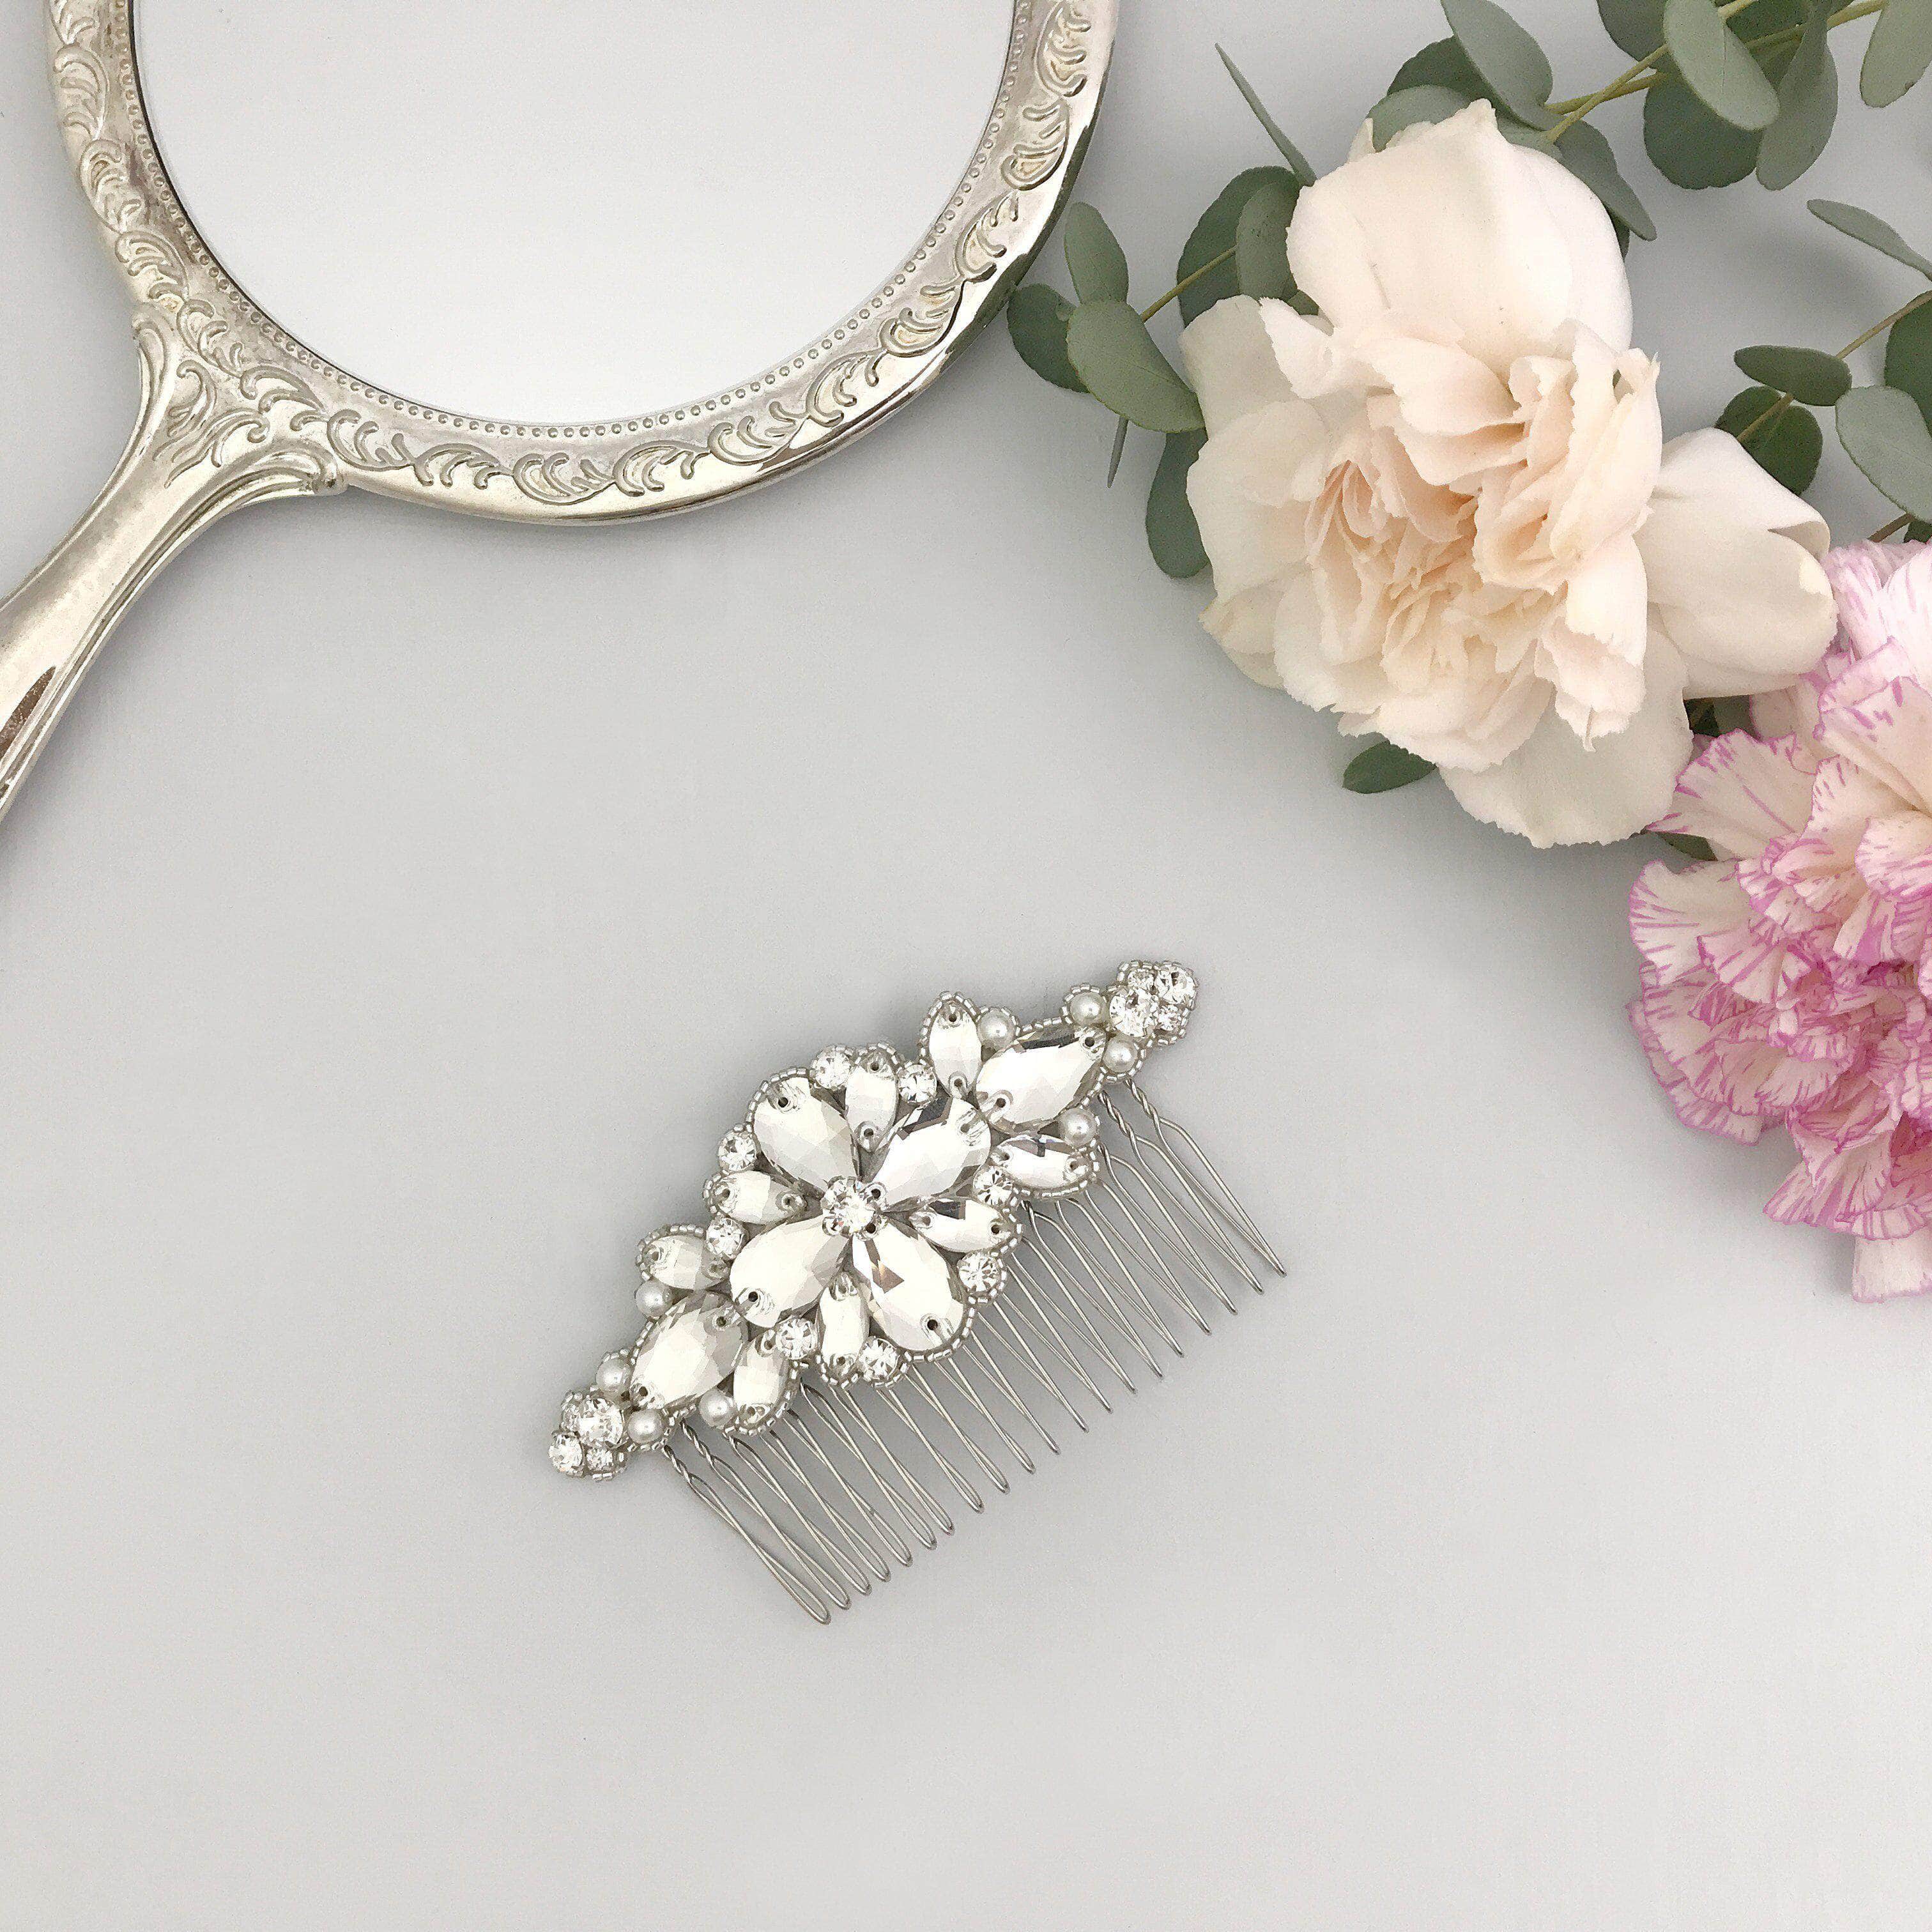 Silver wedding hair comb with crystals and pearls - 'Charia' | Britten Weddings